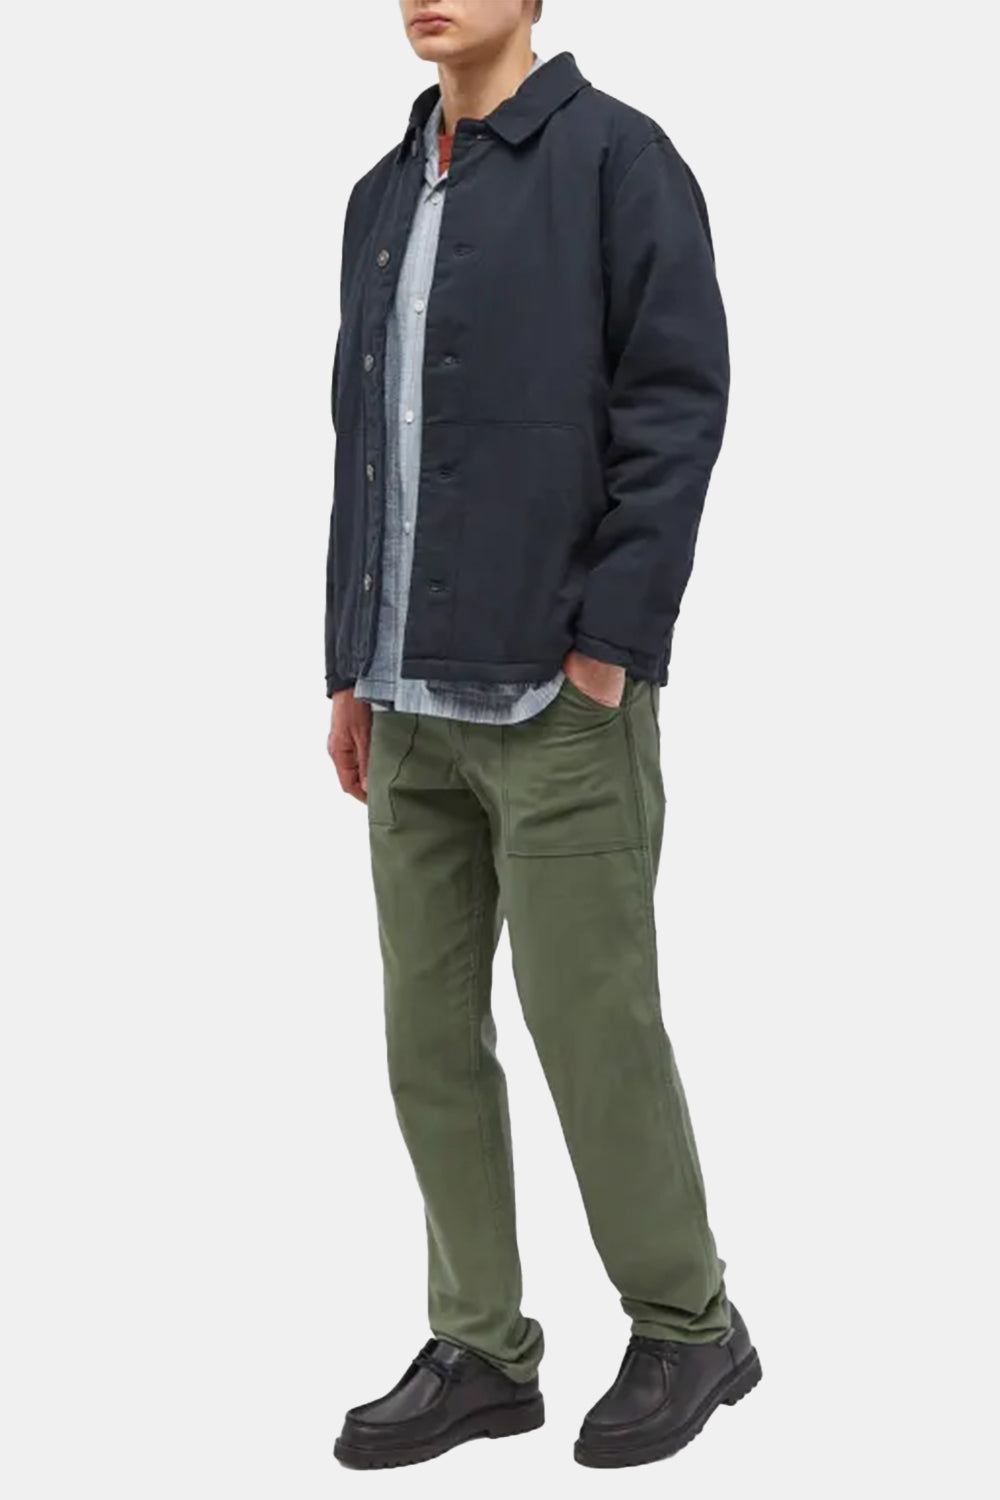 Armor Lux Fisherman's Jacket (Rich Navy)